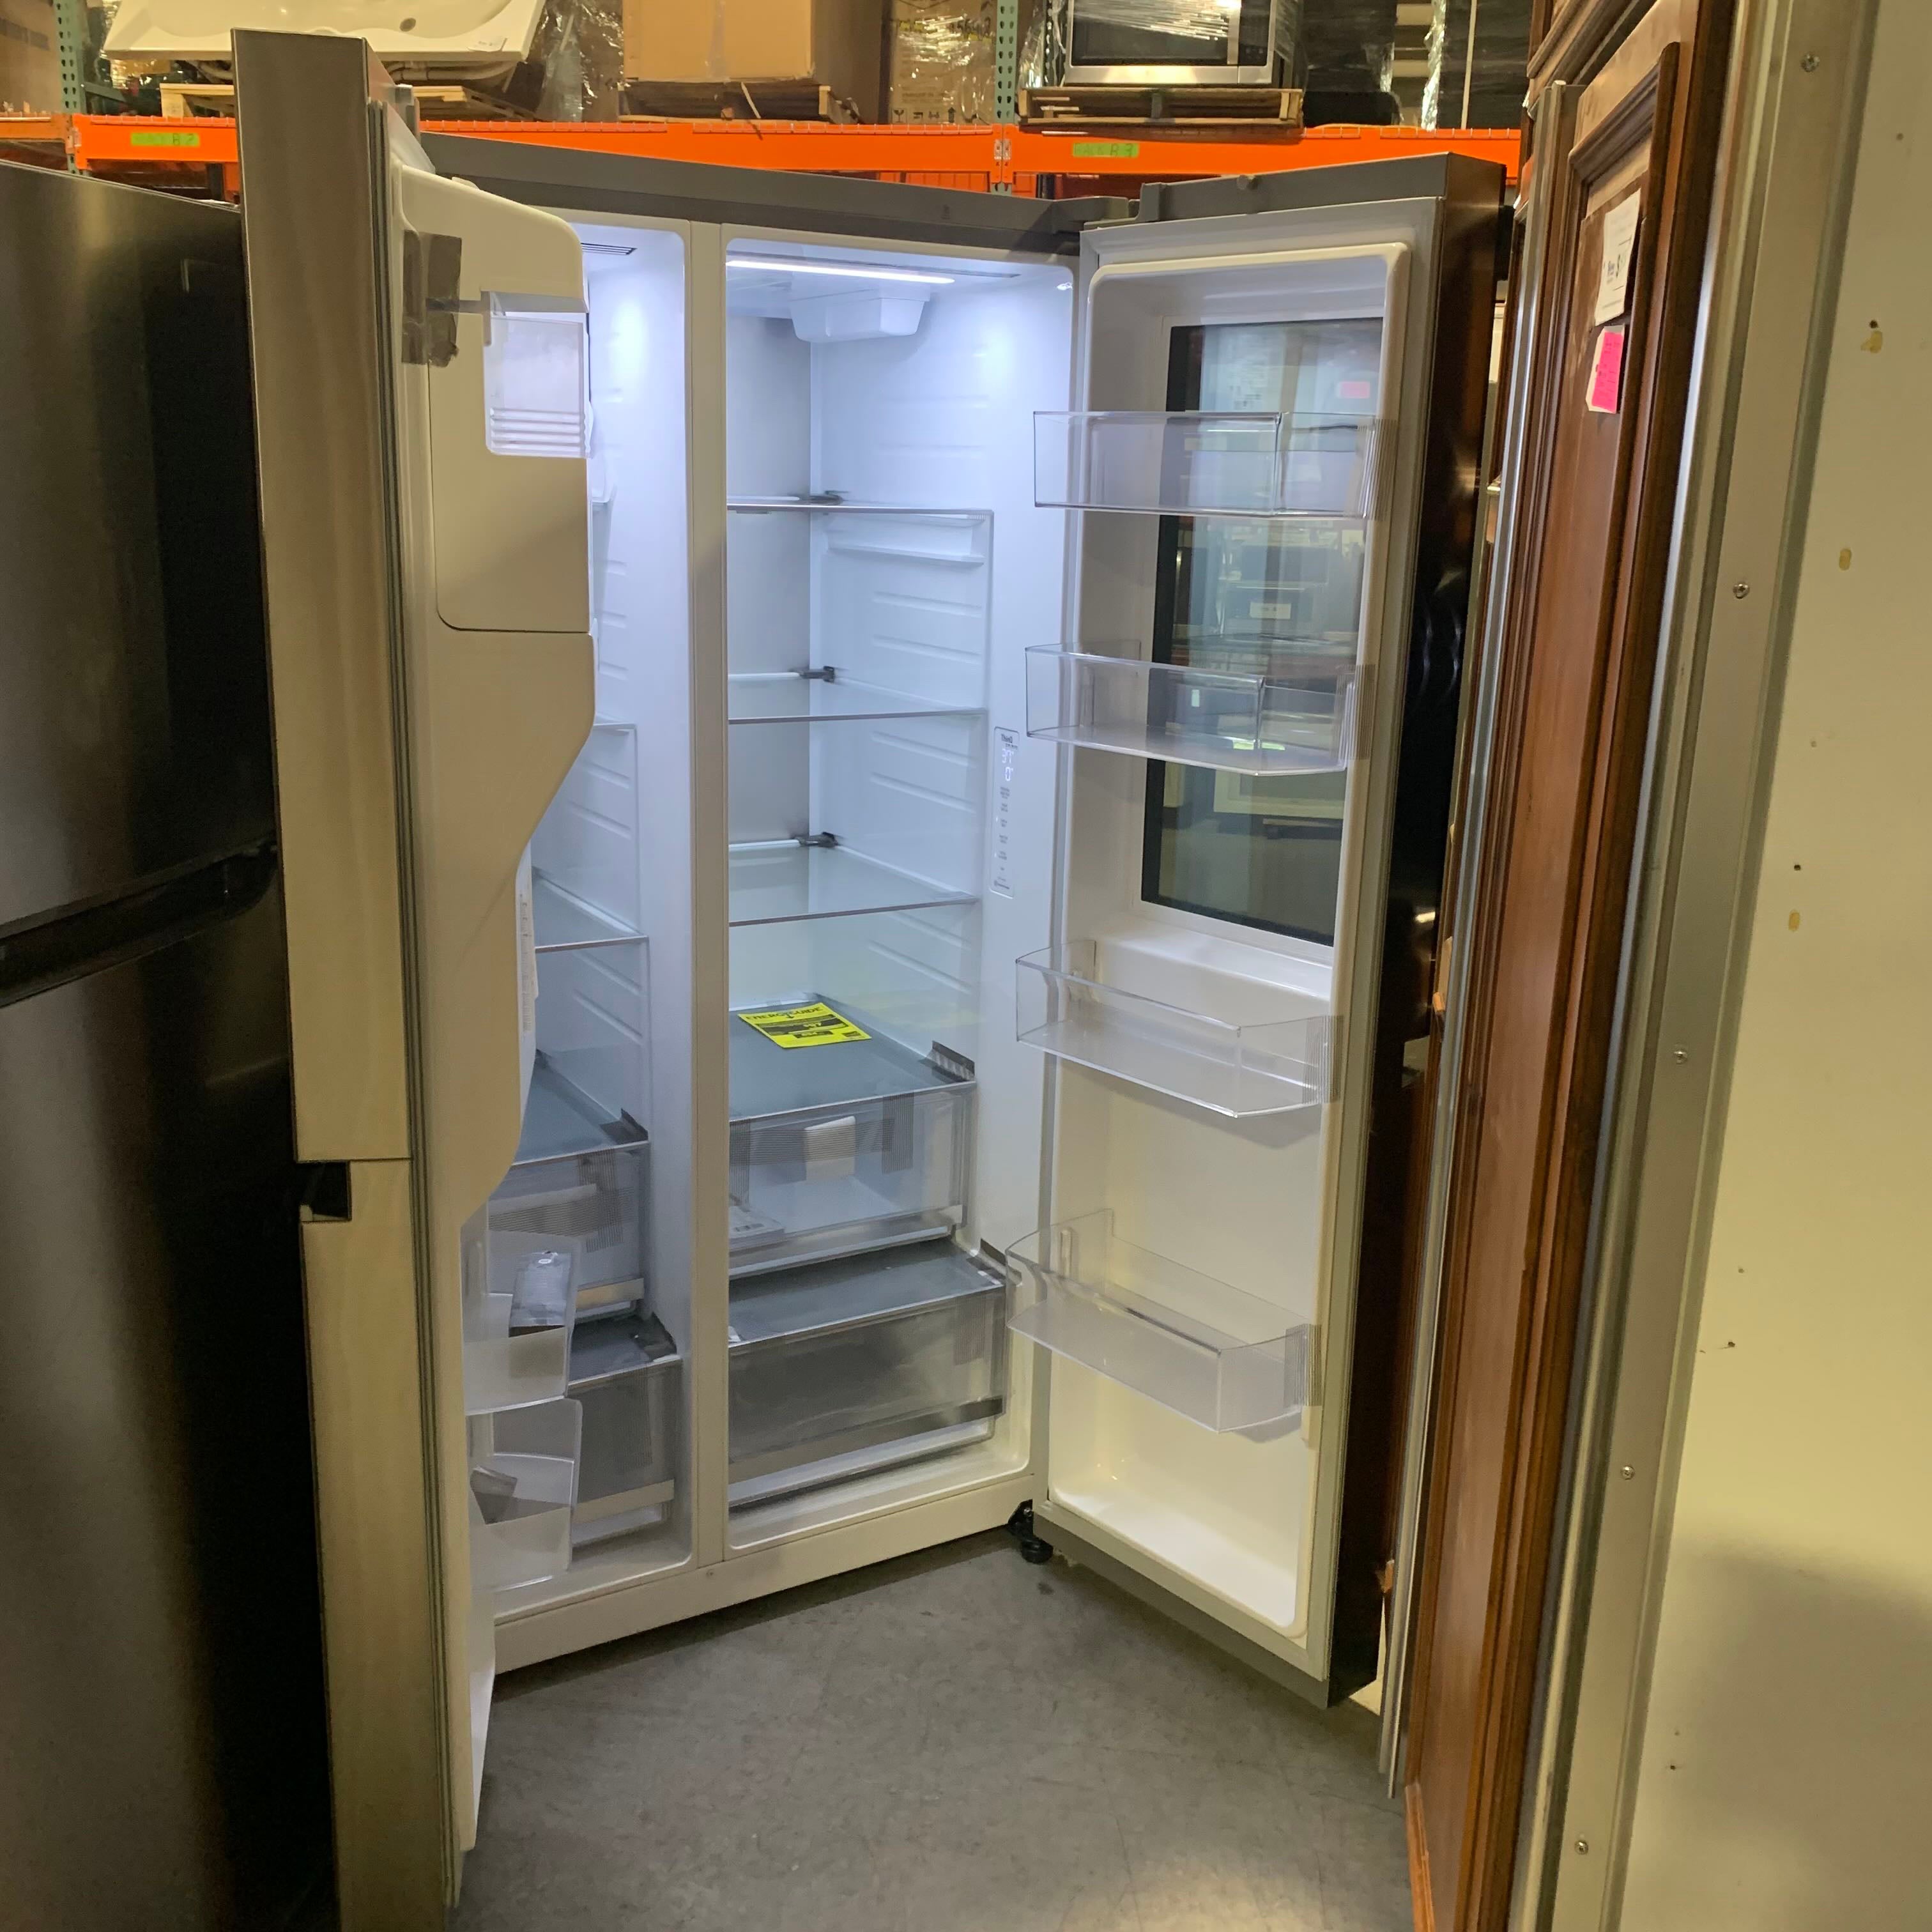 F1023 LG Side by Side Smart Stainless Steel Refrigerator